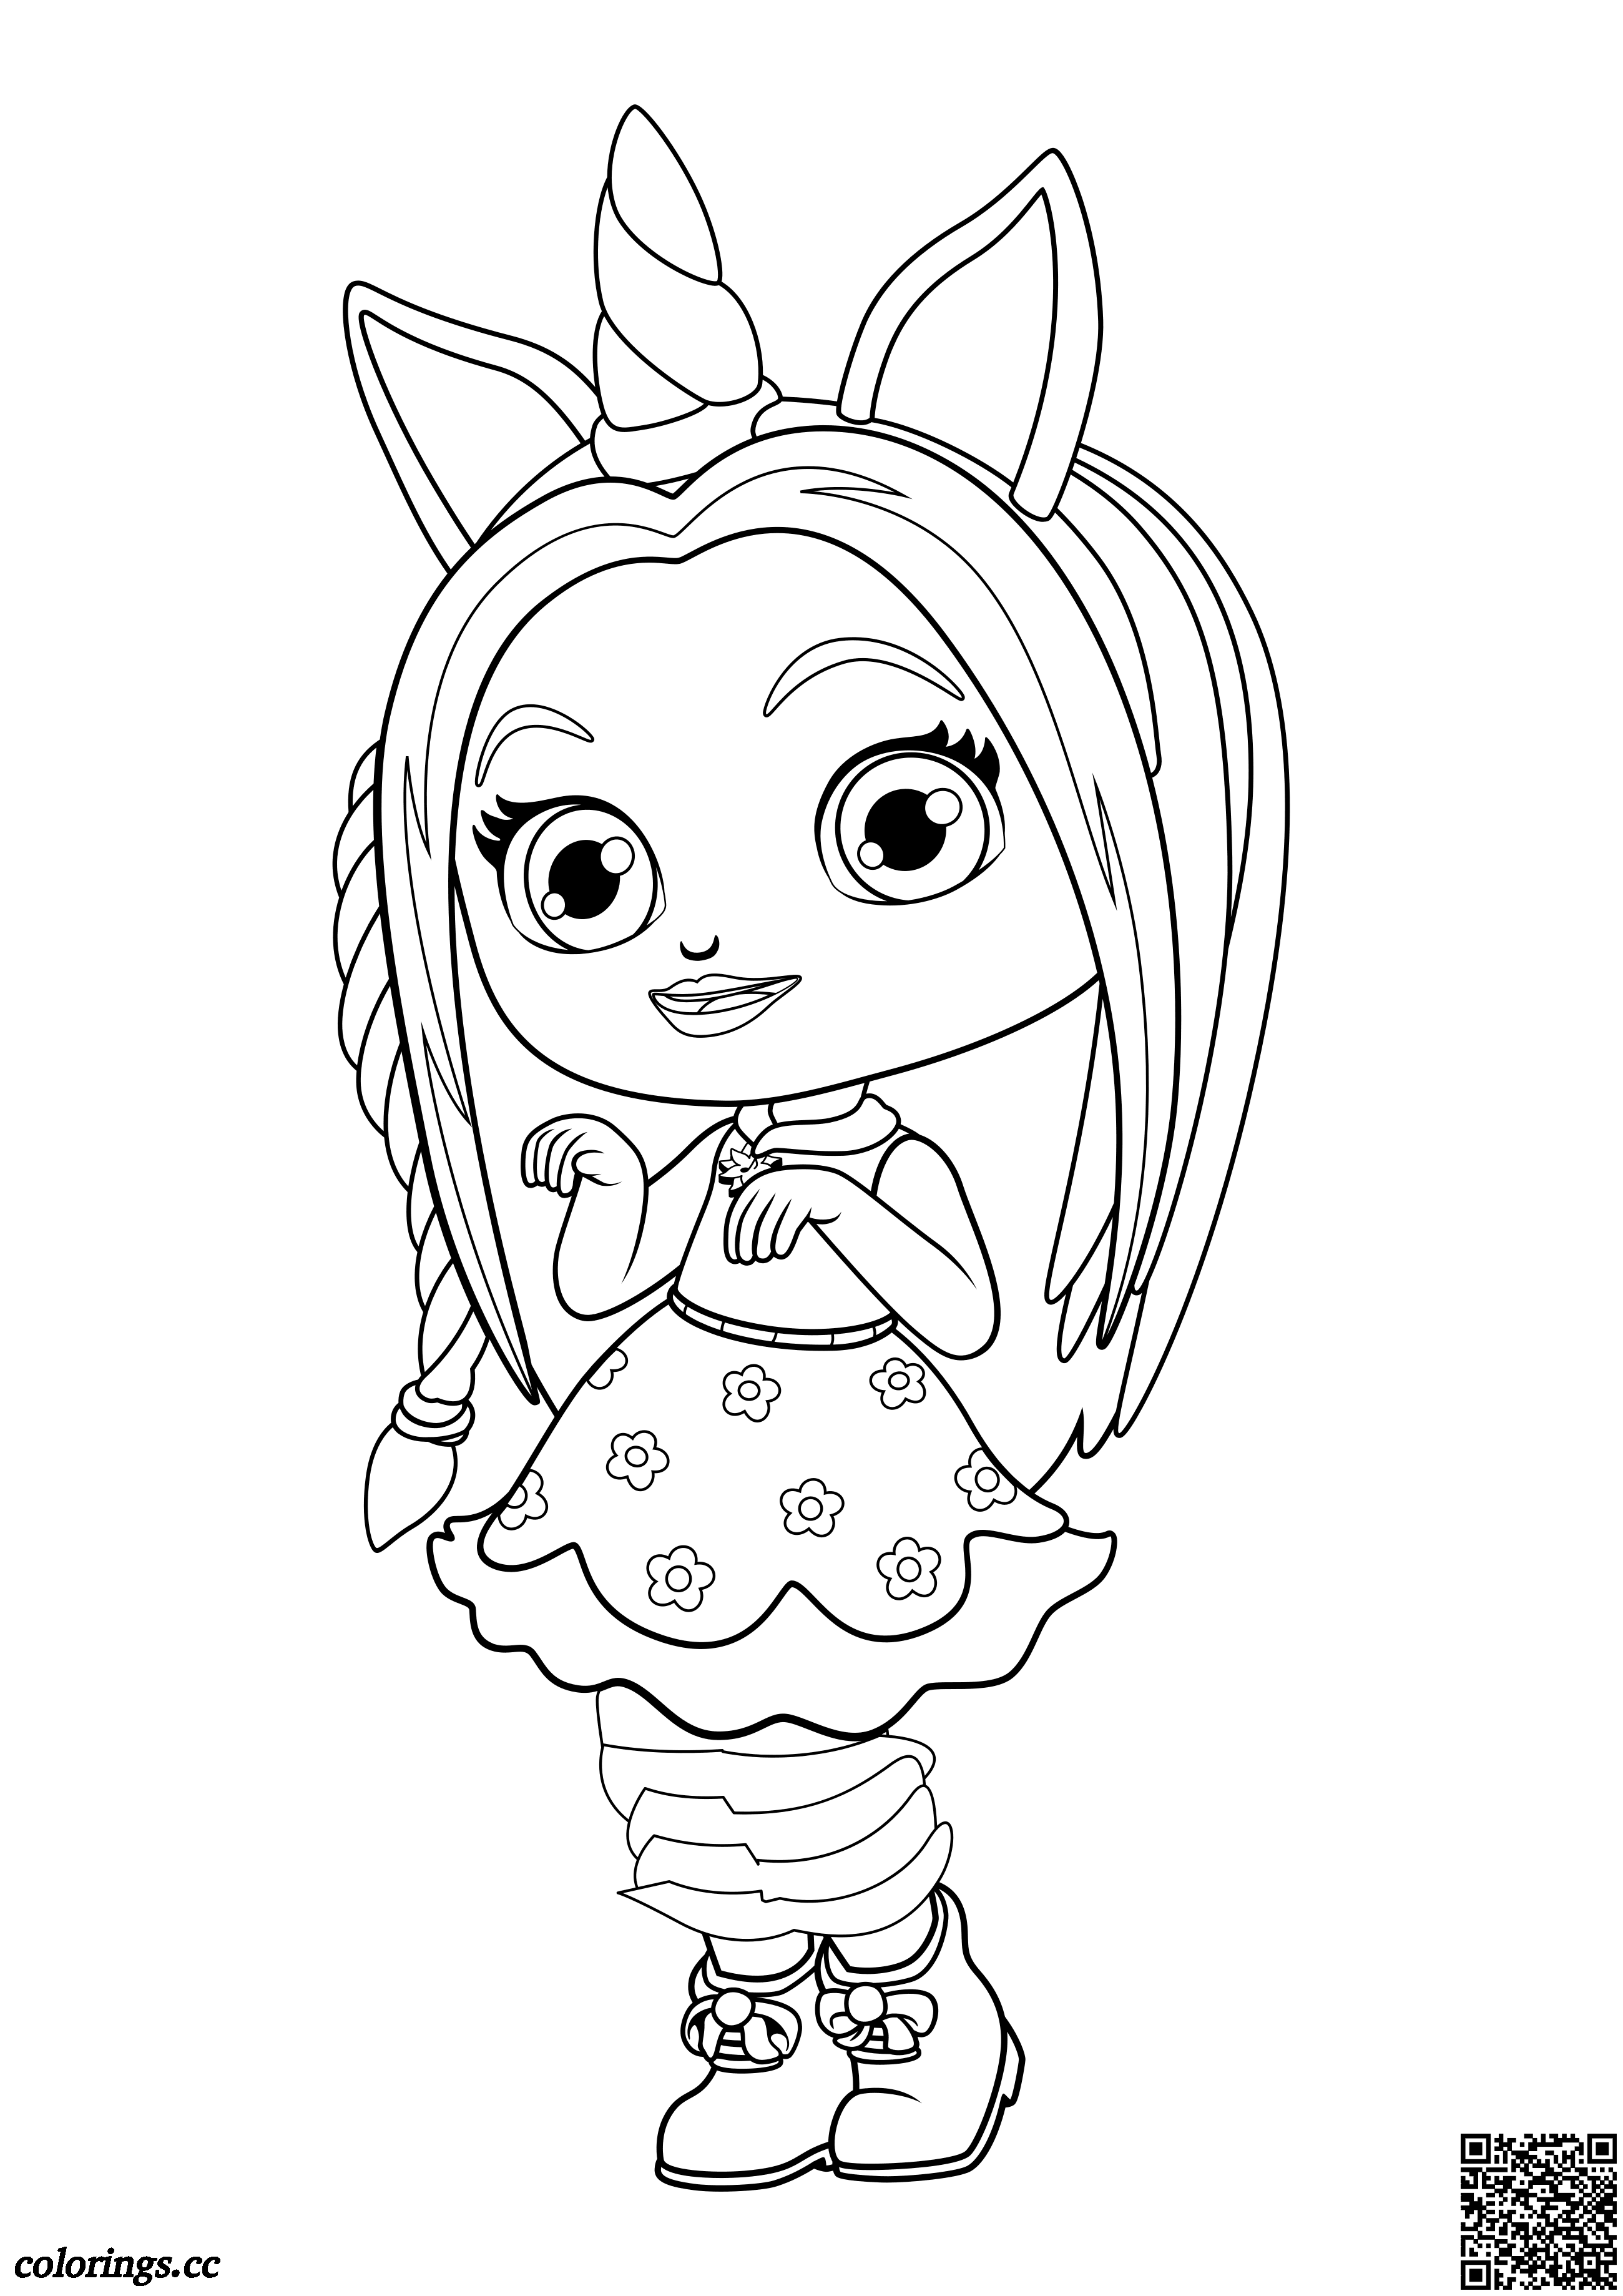 Little Charmers coloring pages, Little fairies coloring pages ...